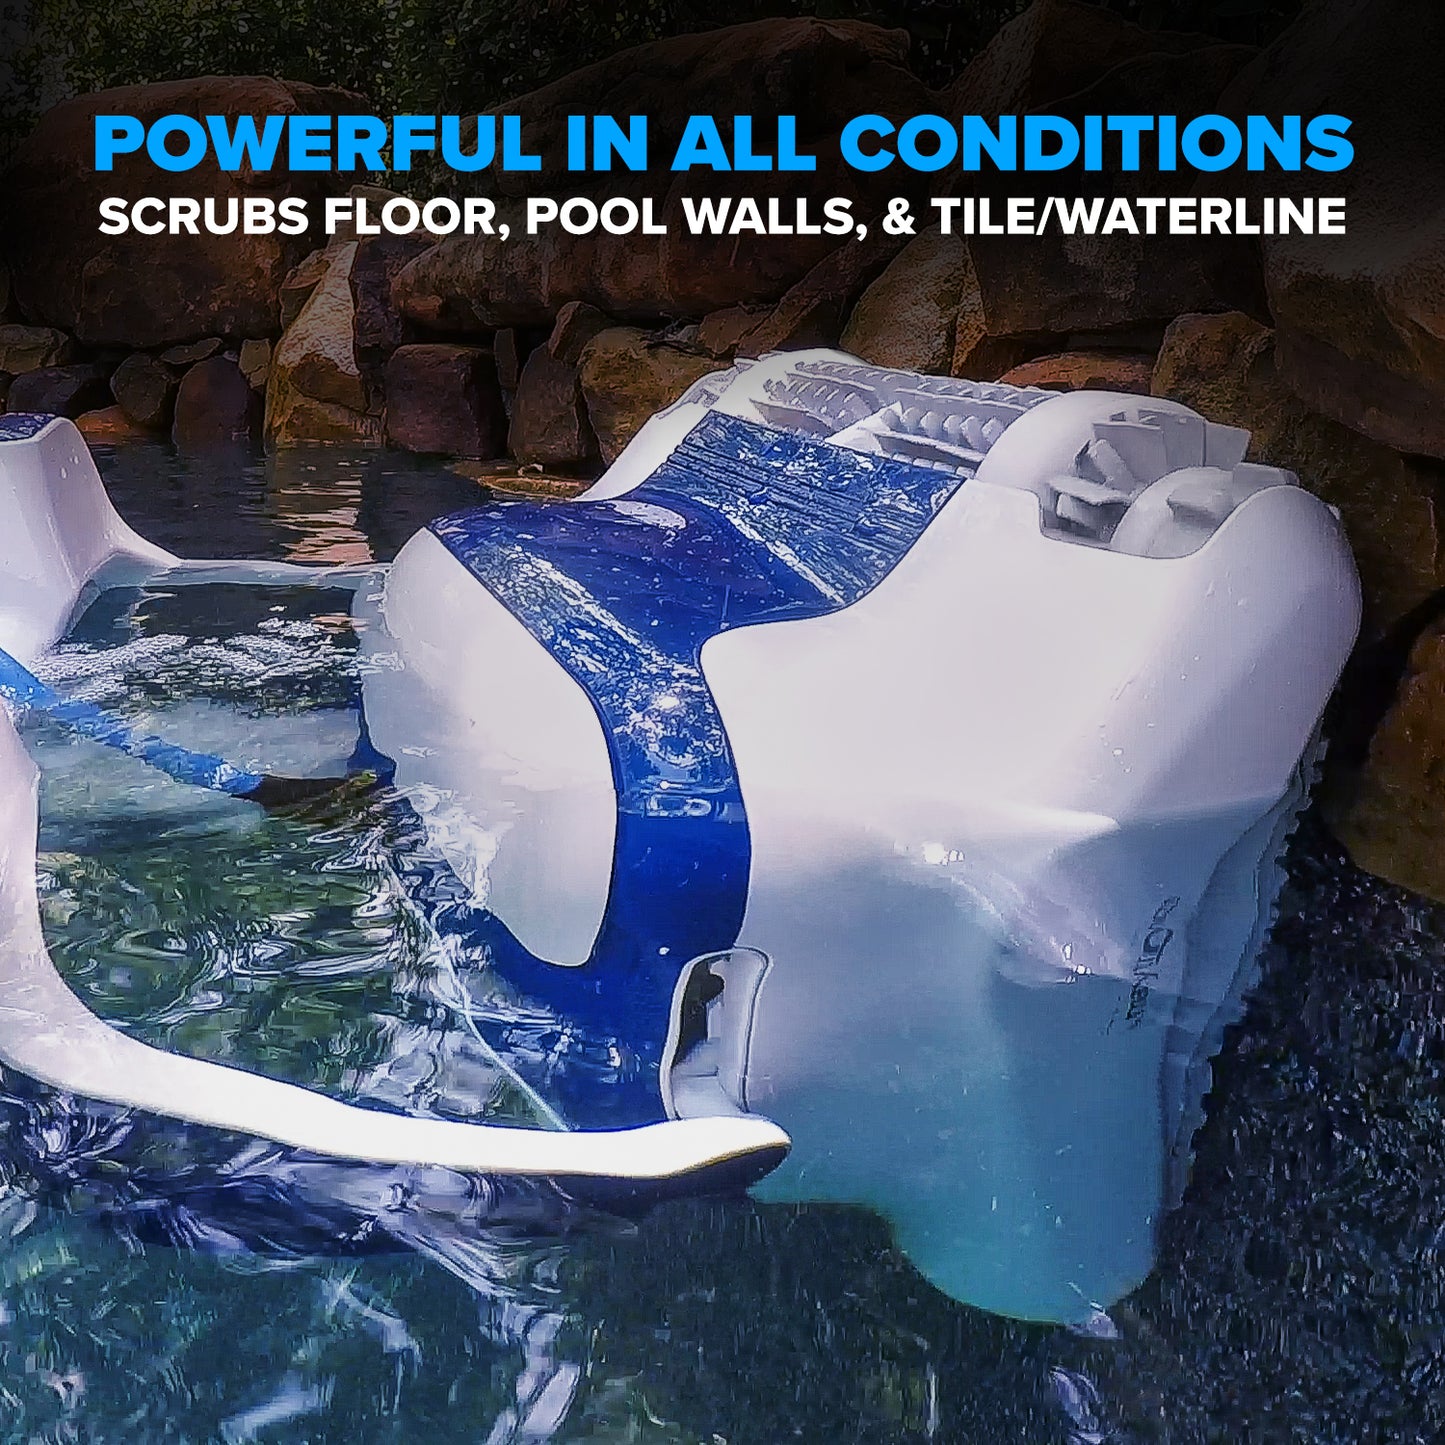 Dolphin Sigma Robotic Pool Cleaner with Gyroscope, Wi-Fi, Oversized Filters, & 3 Year Warranty